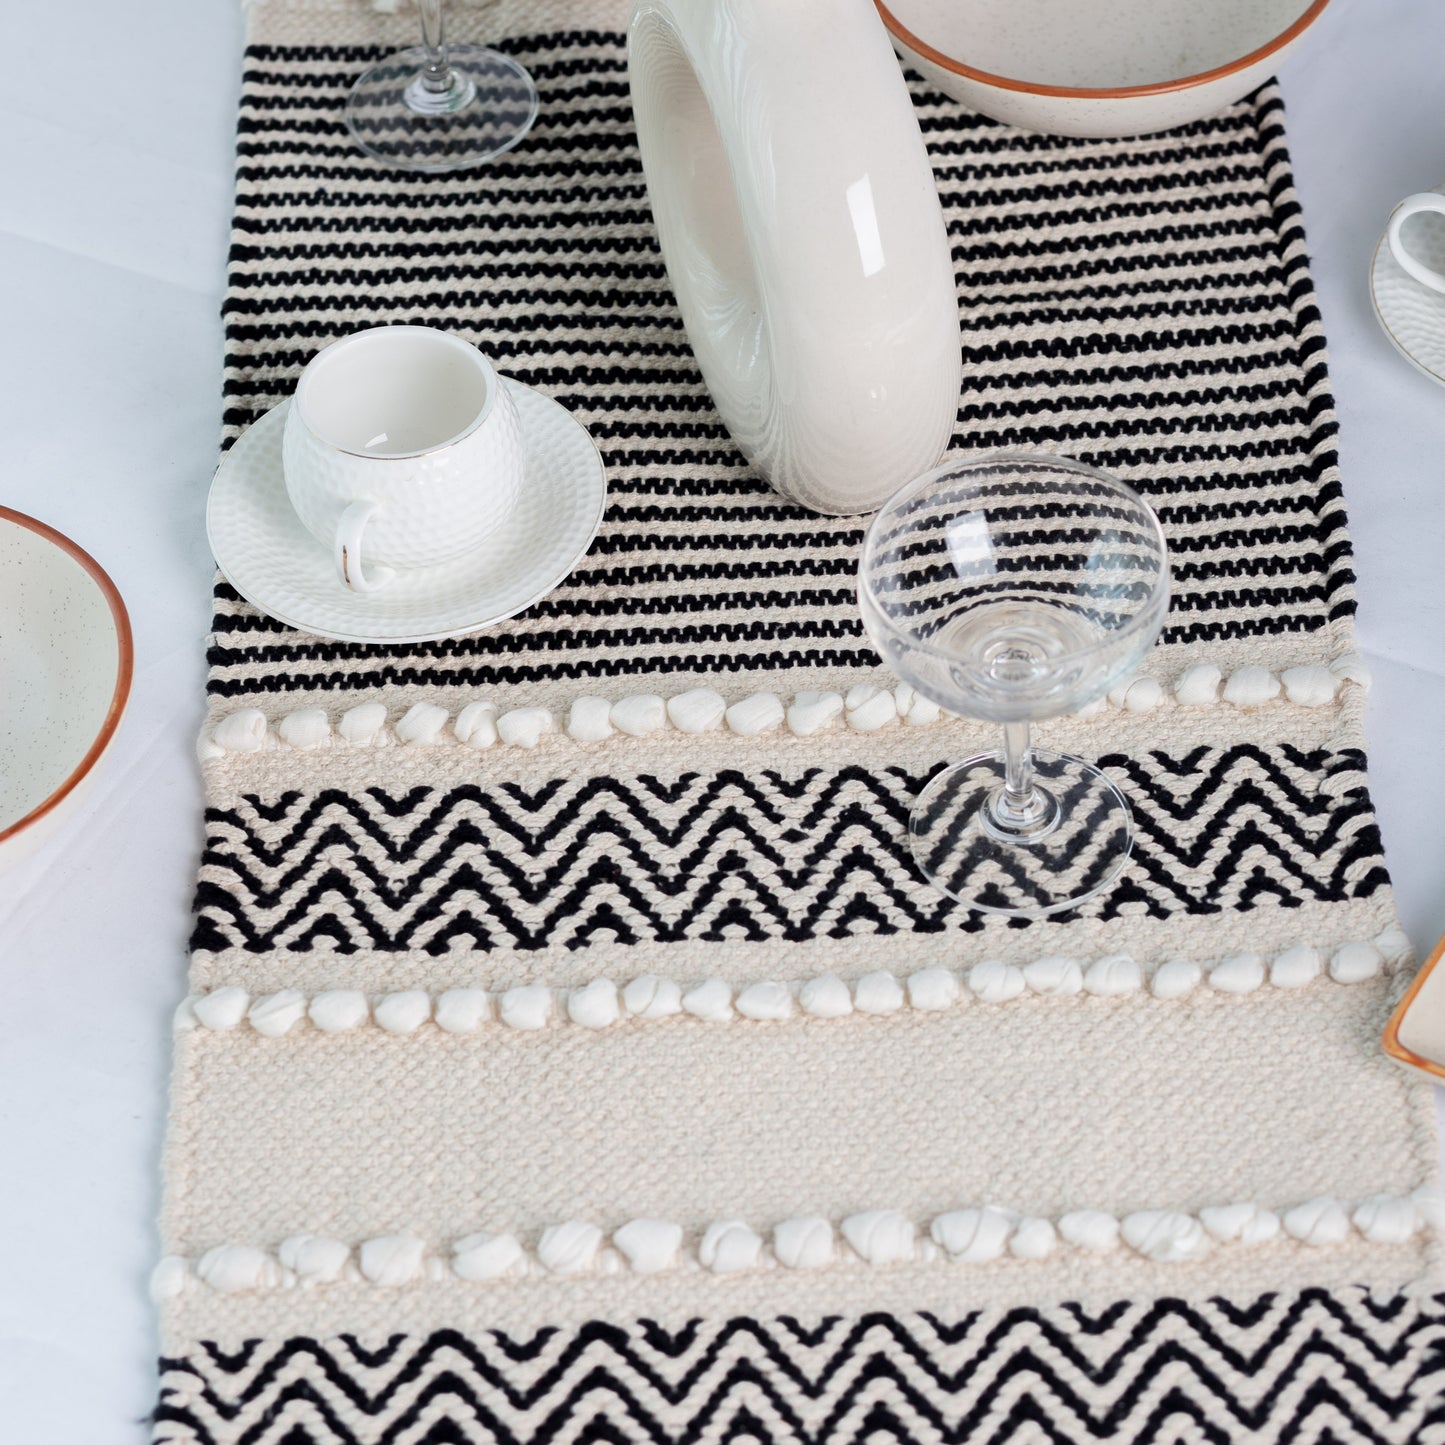 Knotted strip table runner setup